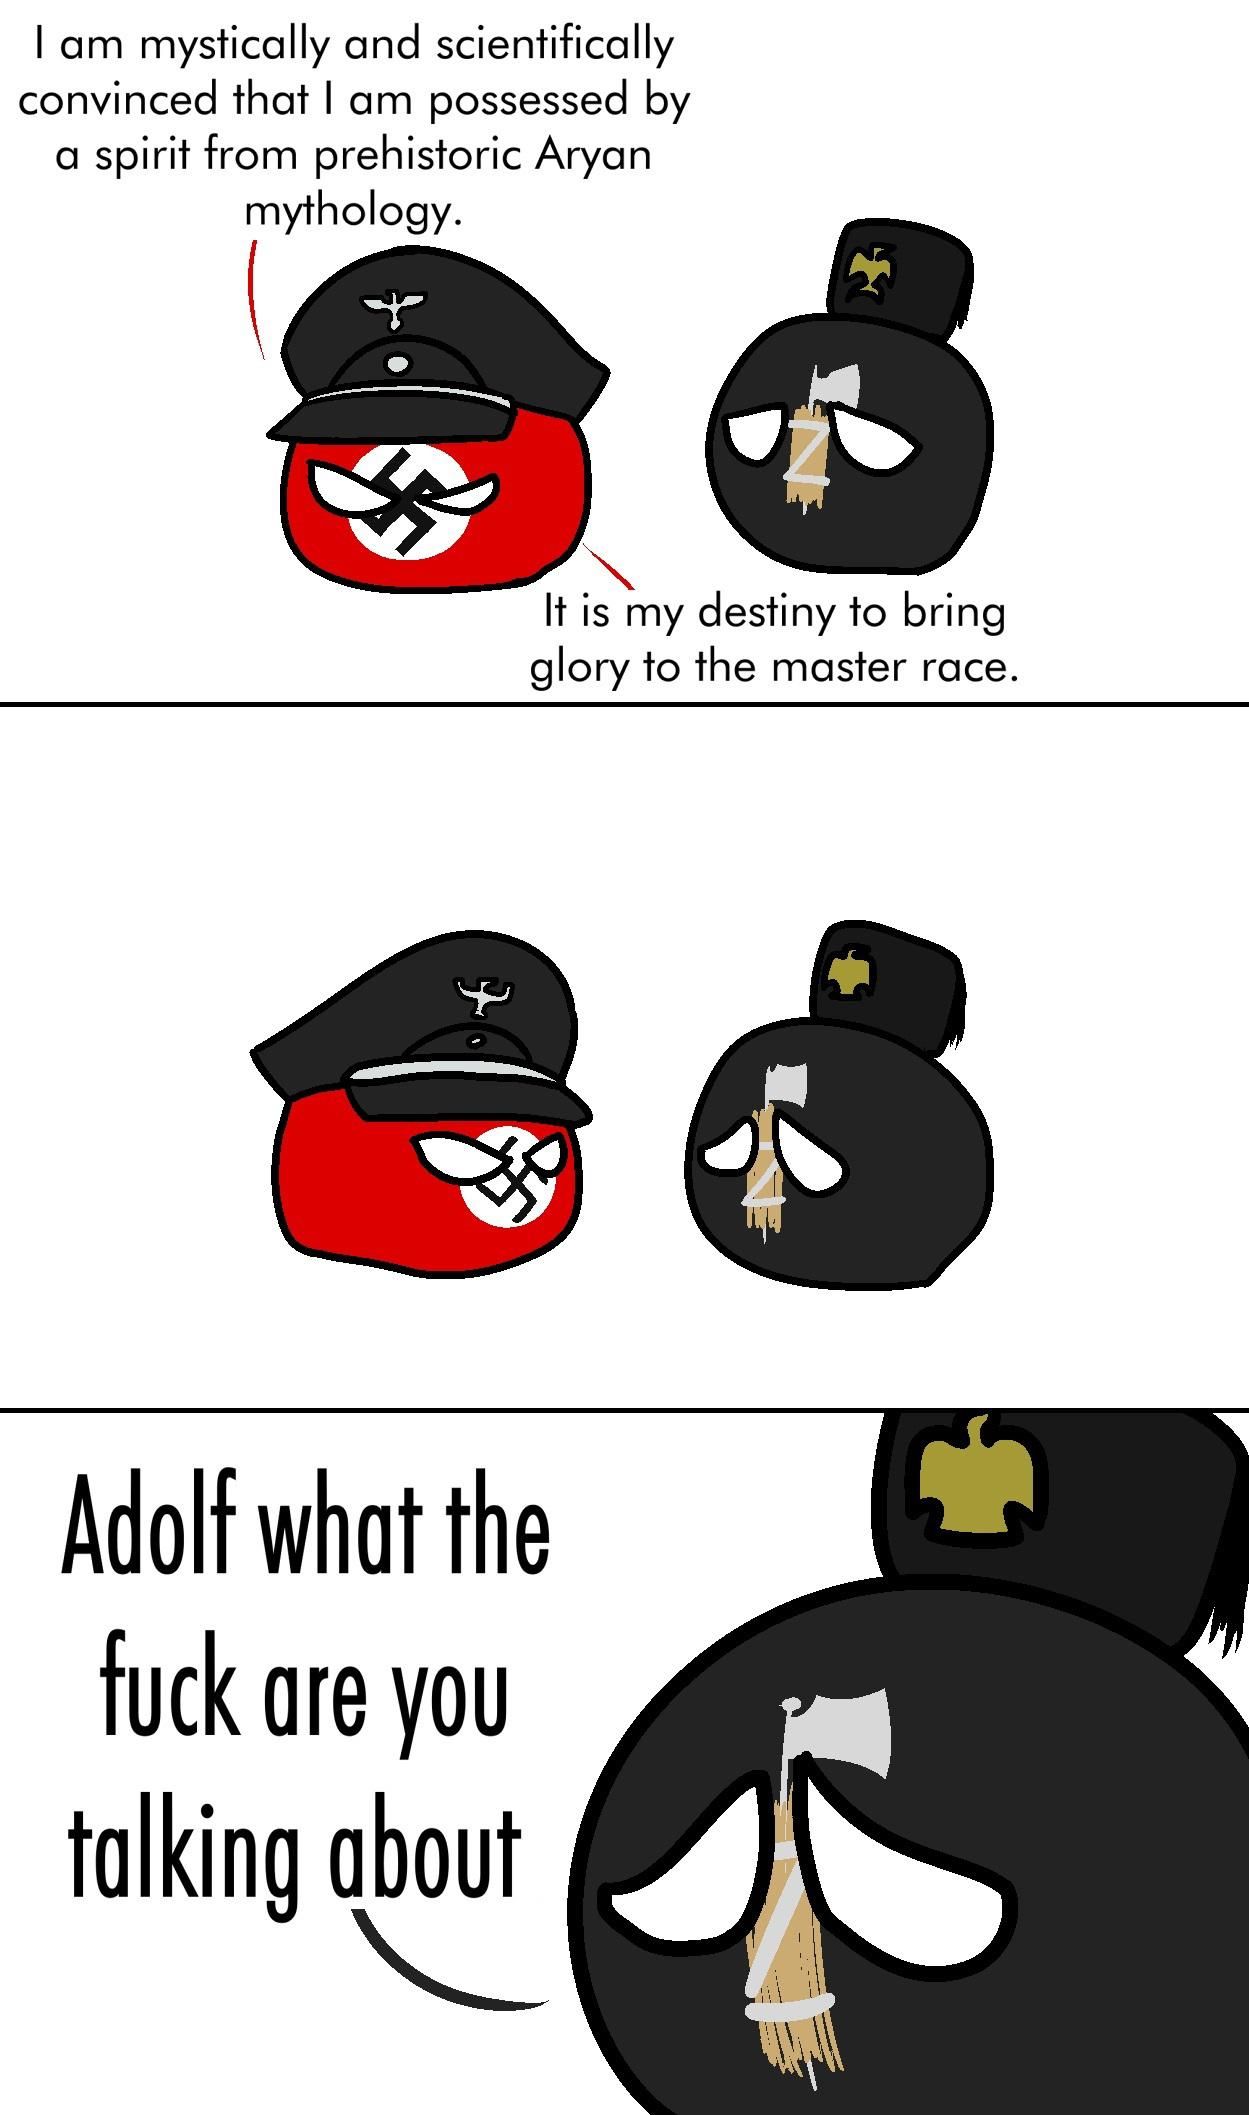 Mussolini is having second thoughts